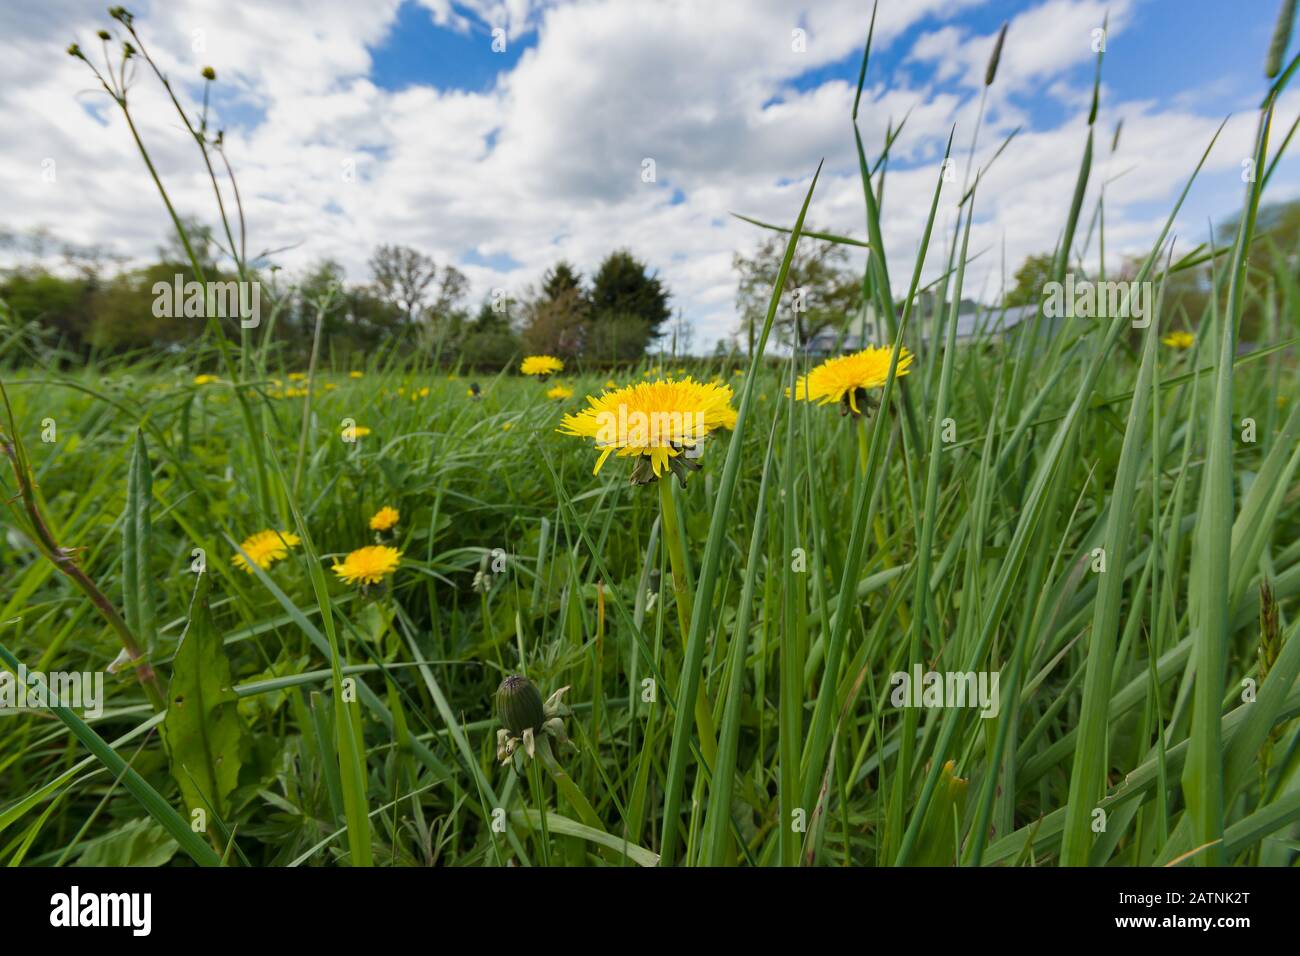 Dandelions latin name Taraxacum officinale in an overgrown weed filled garden or meadow Stock Photo